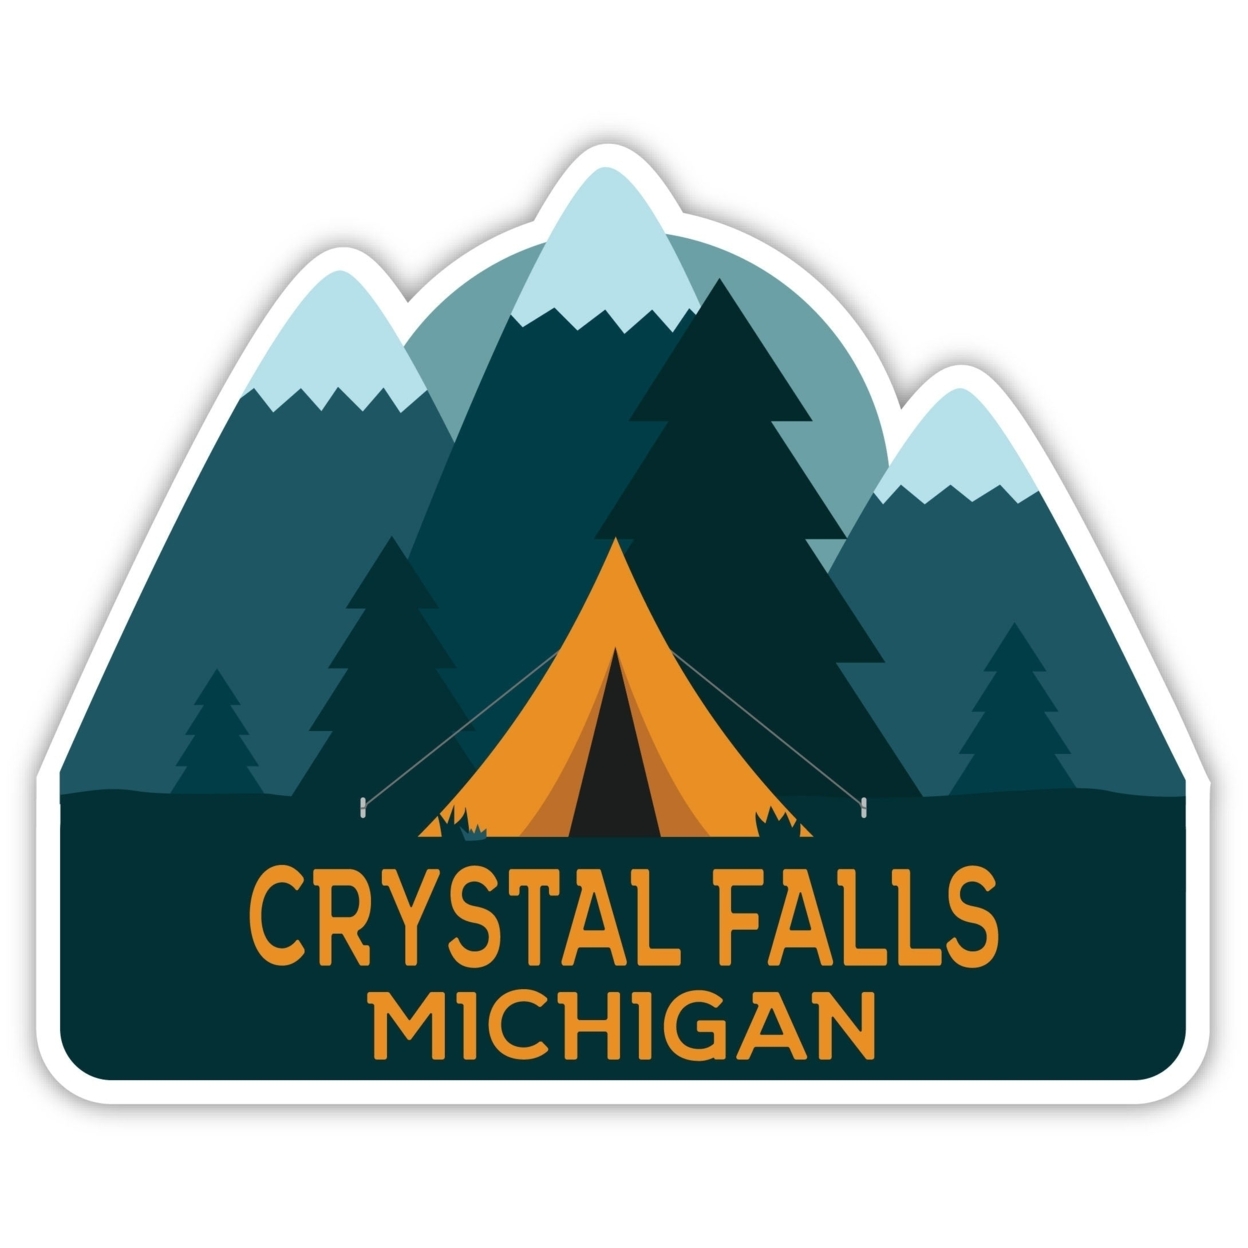 Crystal Falls Michigan Souvenir Decorative Stickers (Choose Theme And Size) - 4-Pack, 4-Inch, Tent